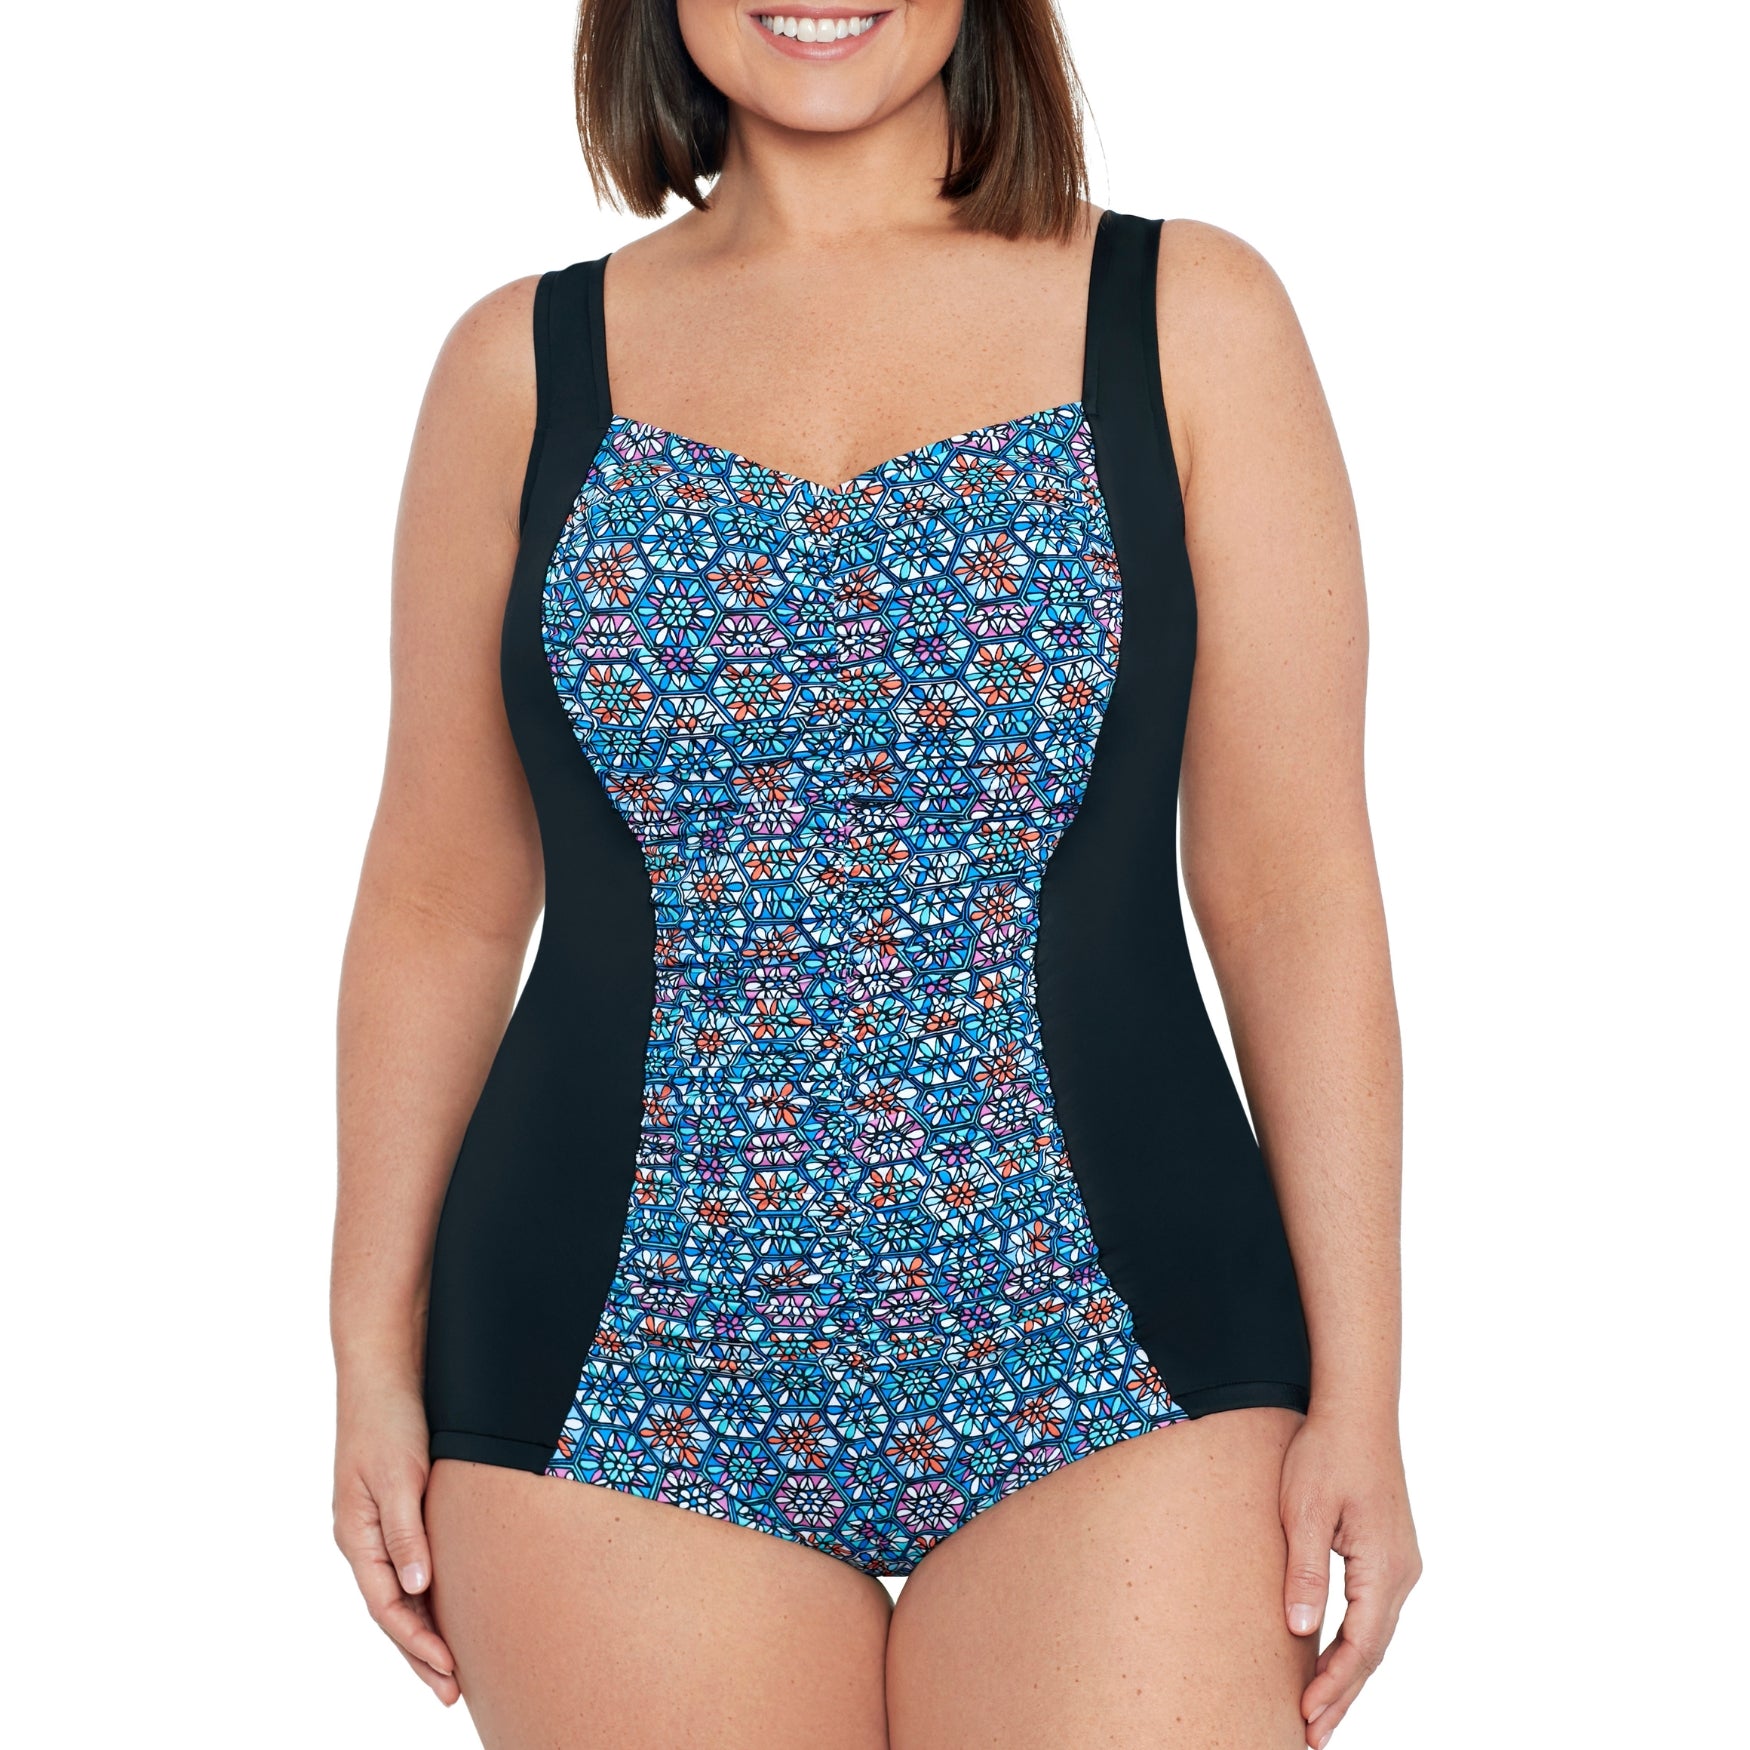 Women's One-Piece Plus Size Swimsuit, Shirred with Modest Girl Leg Cut -  Tile Play